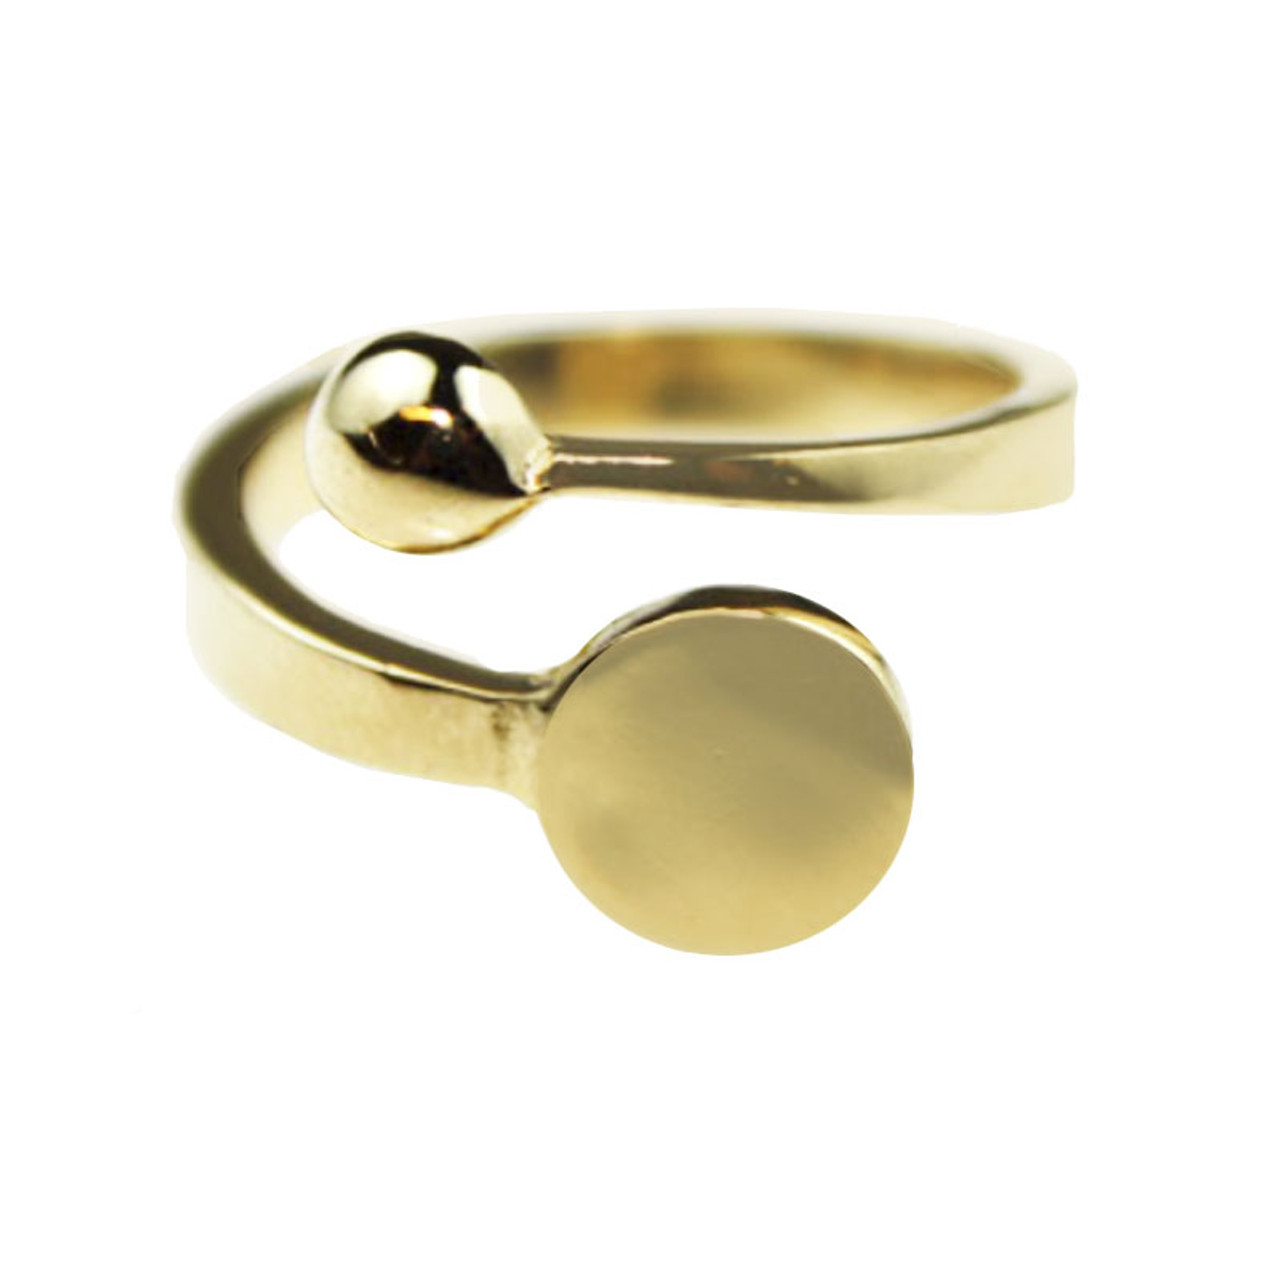 12 Gold and Silver Plated Adjustable Ring Blanks with 10mm Pad